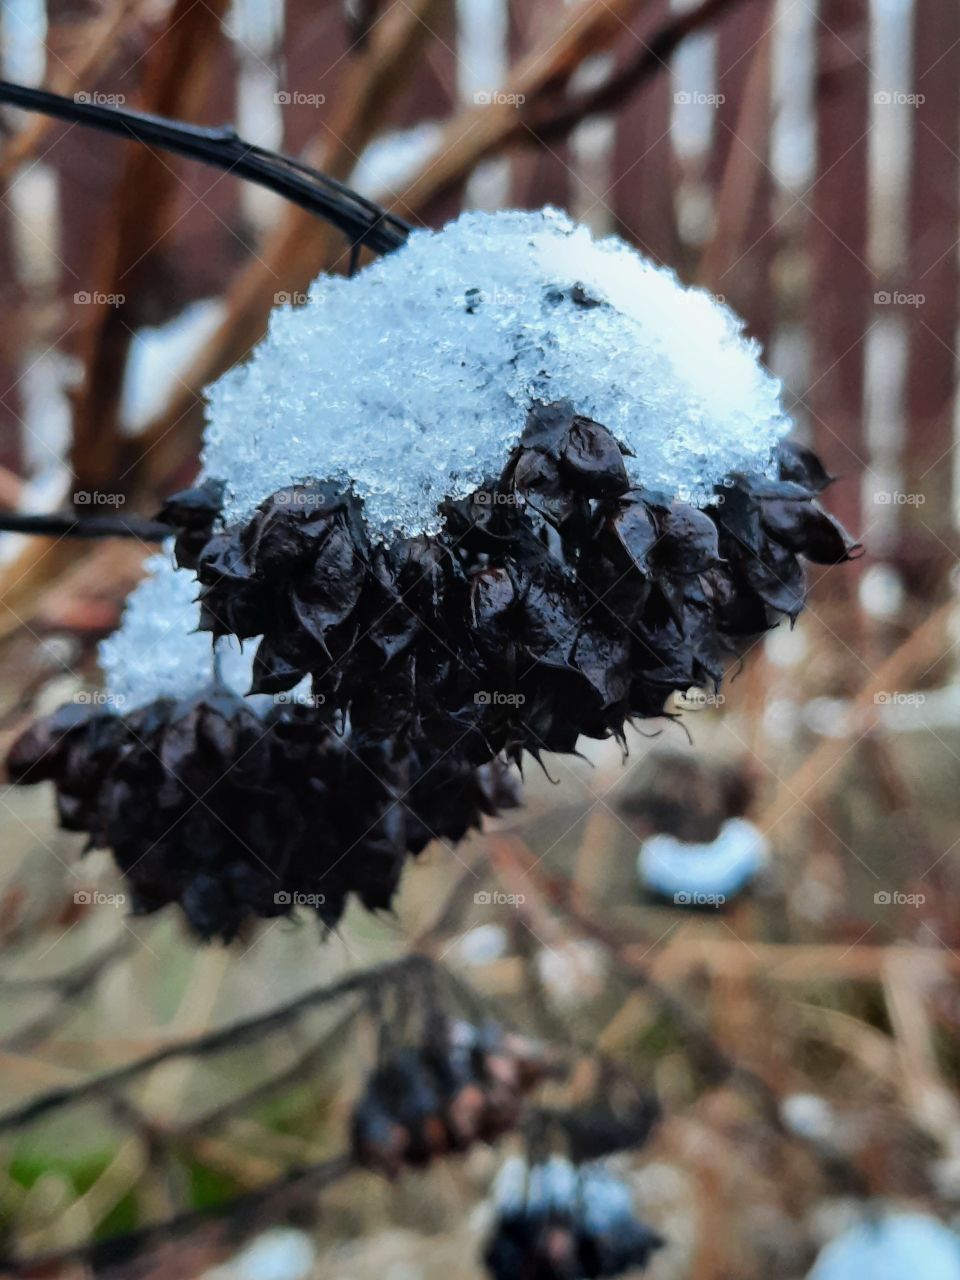 color black - snow on the black fruit of the physalis